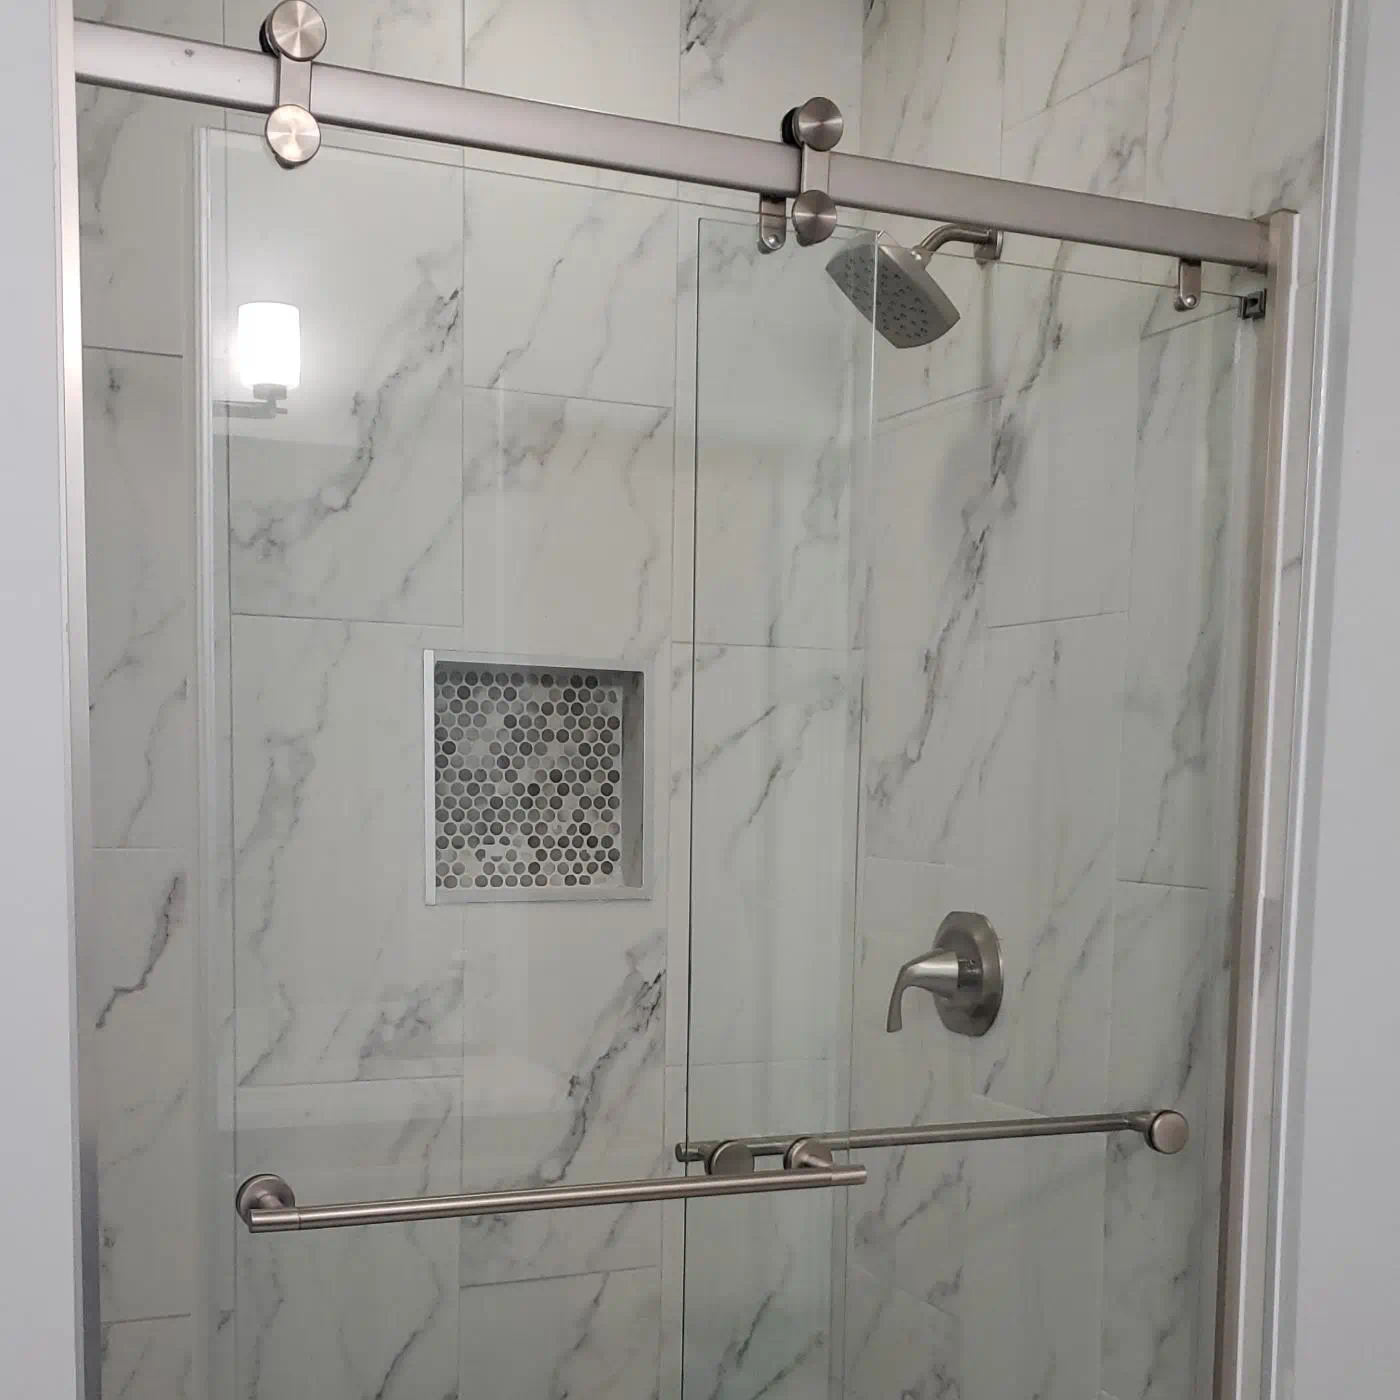 An image of a shower project in a bathroom completed by ProSource of Raleigh